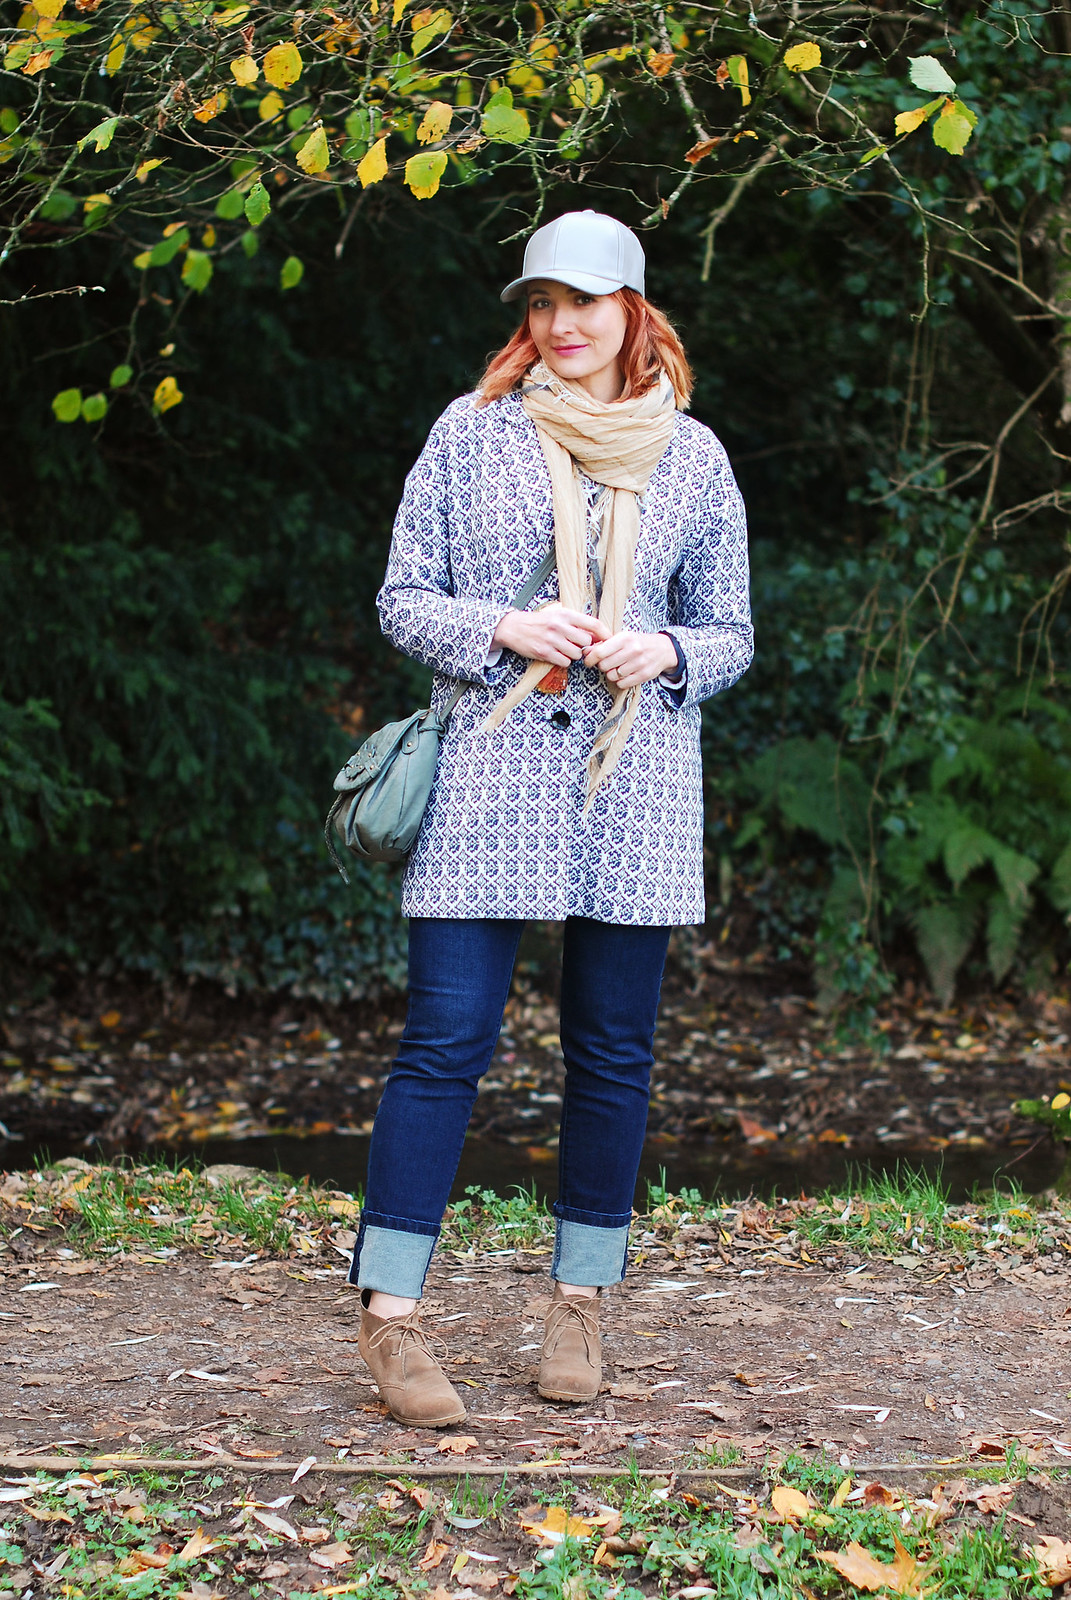 Cold weather walking in the woods walking the dog outfit Tapestry coat, deep hem skinnie jeans, grey cap and wedge desert boots | Not Dressed As Lamb, over 40 style blog